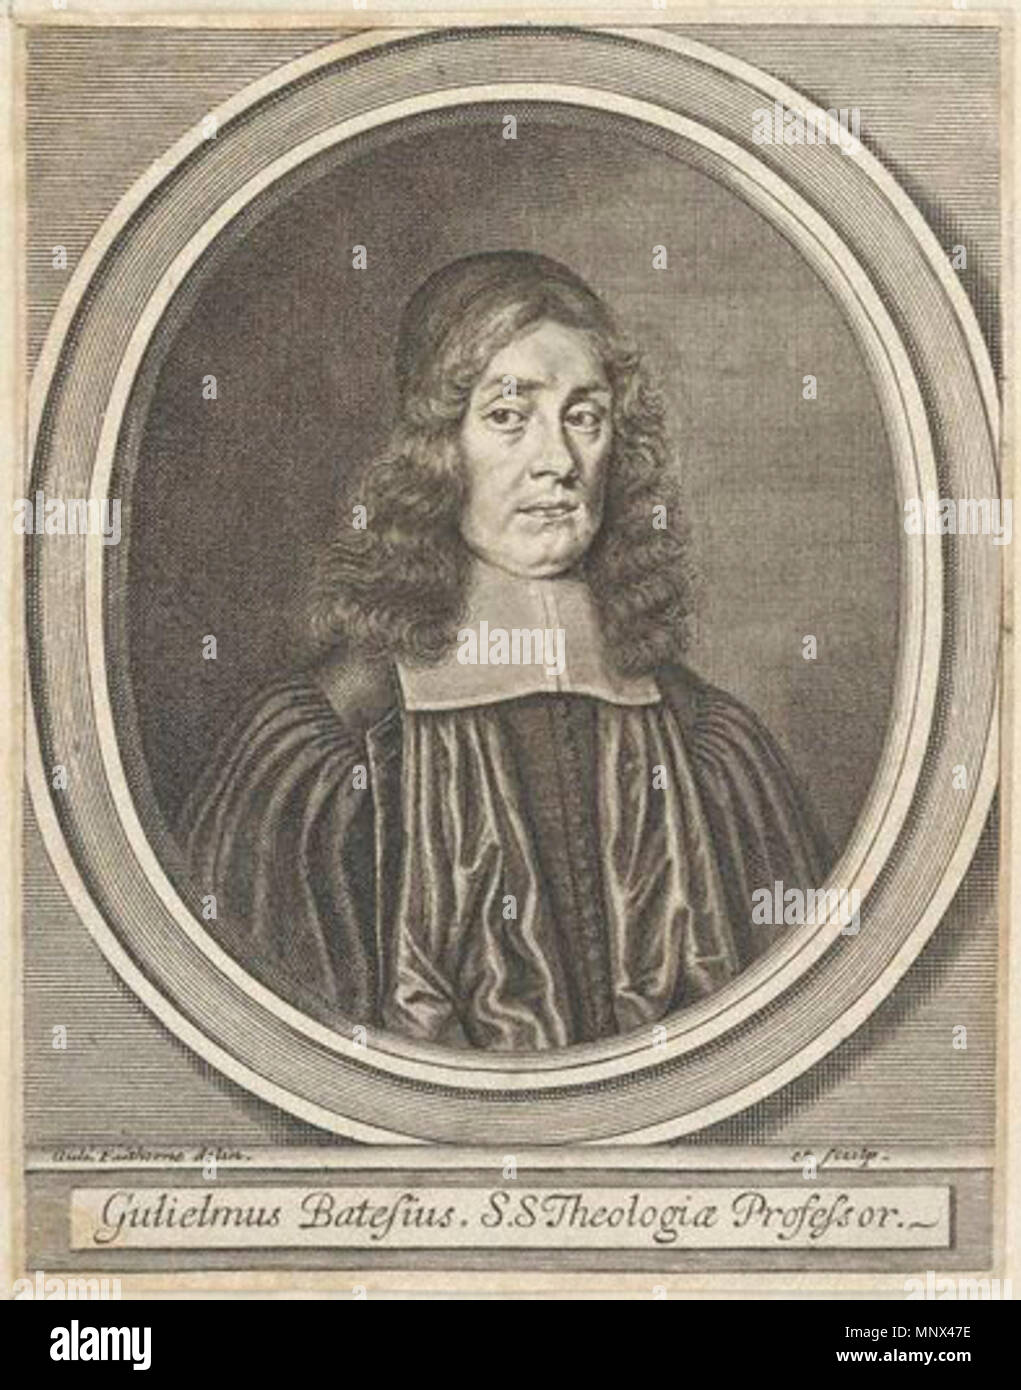 by William Faithorne,print,published 1675    . English: Portrait of William Bates (1625-1699), presbyterian minister. 1675.   William Faithorne  (1616–1691)    Alternative names William, the elder Faithorne; William,The Elder Faithorne; William Faithorne the Elder; William Faithorne The Elder  Description British painter, printmaker and printseller father of William Faithorne the Younger  Date of birth/death 1616 13 May 1691  Location of birth/death Greater London Greater London  Work location London  Authority control  : Q3568608 VIAF: 284244 ISNI: 0000 0000 8079 797X ULAN: 500115446 LCCN: n8 Stock Photo